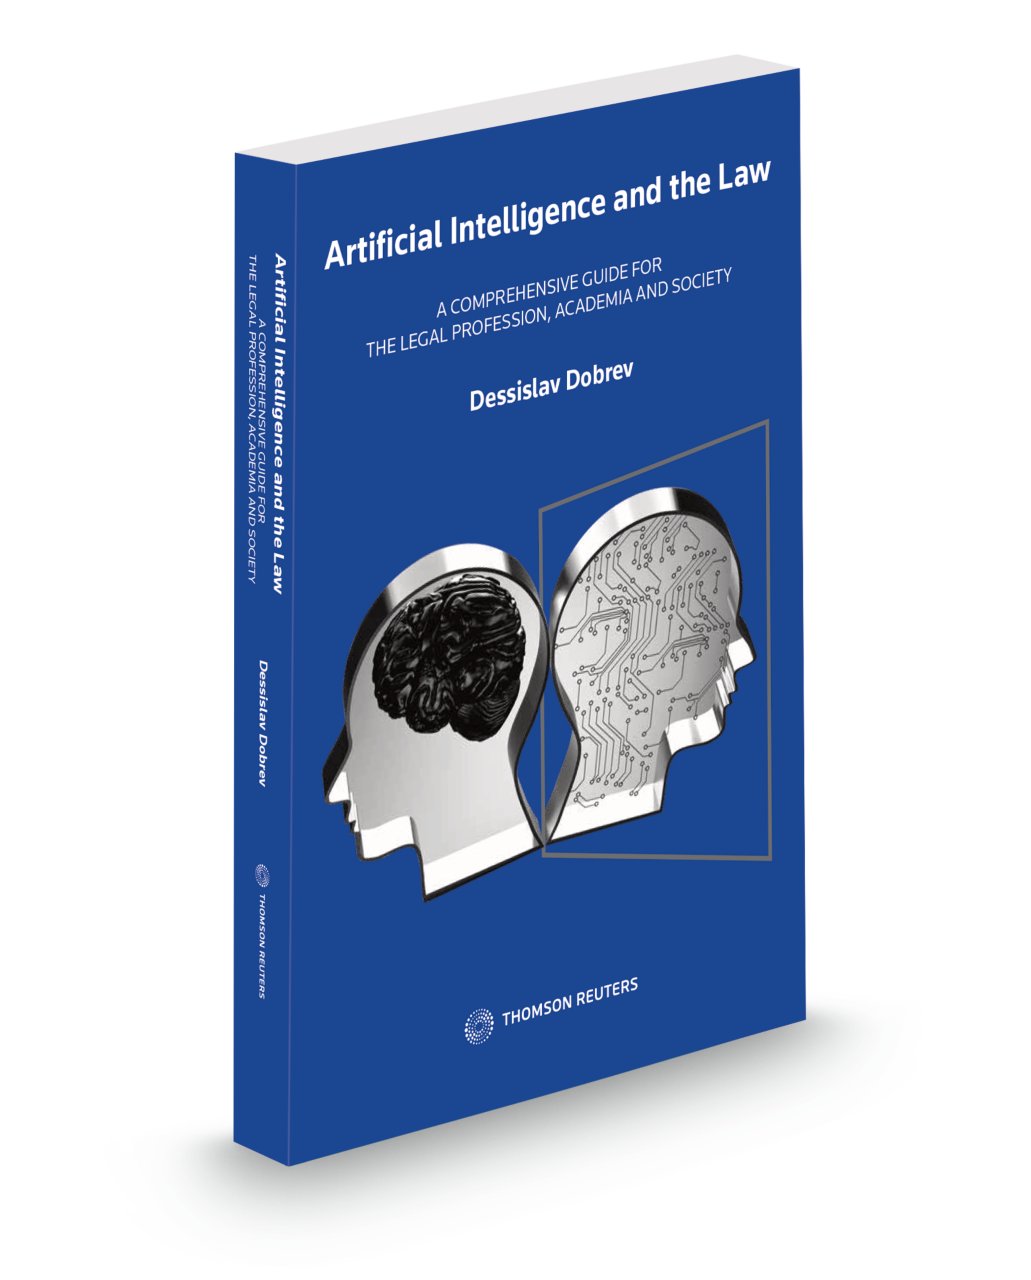 Cover of Artificial Intelligence and the Law: A Comprehensive Guide for the Legal Profession, Academia and Society, Softbound book